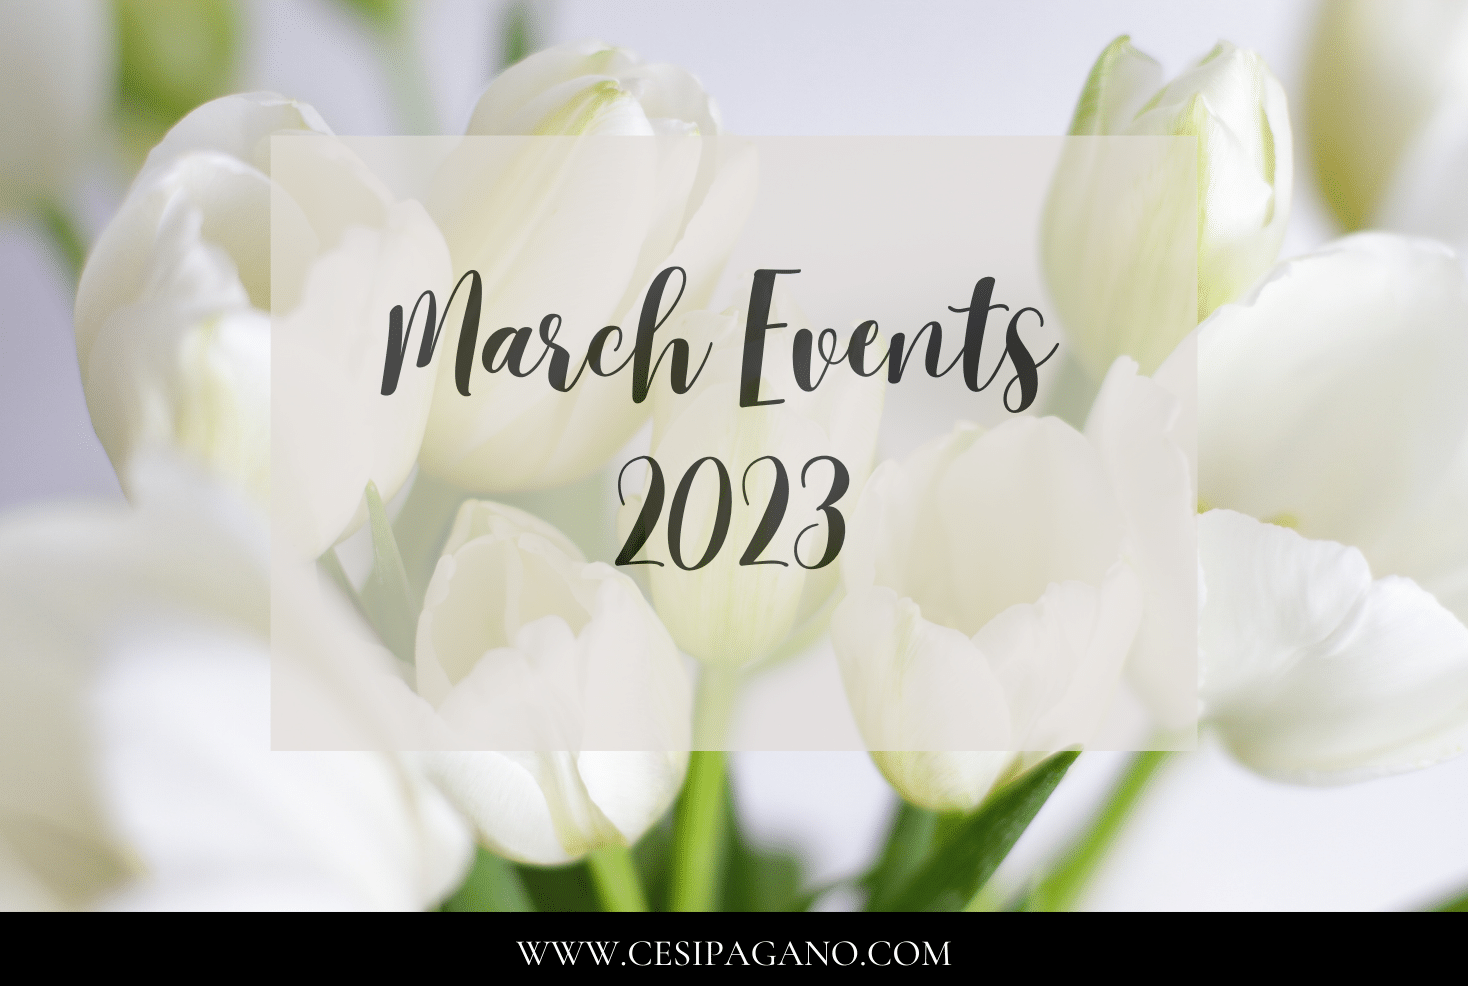 Orange County Events March 2023